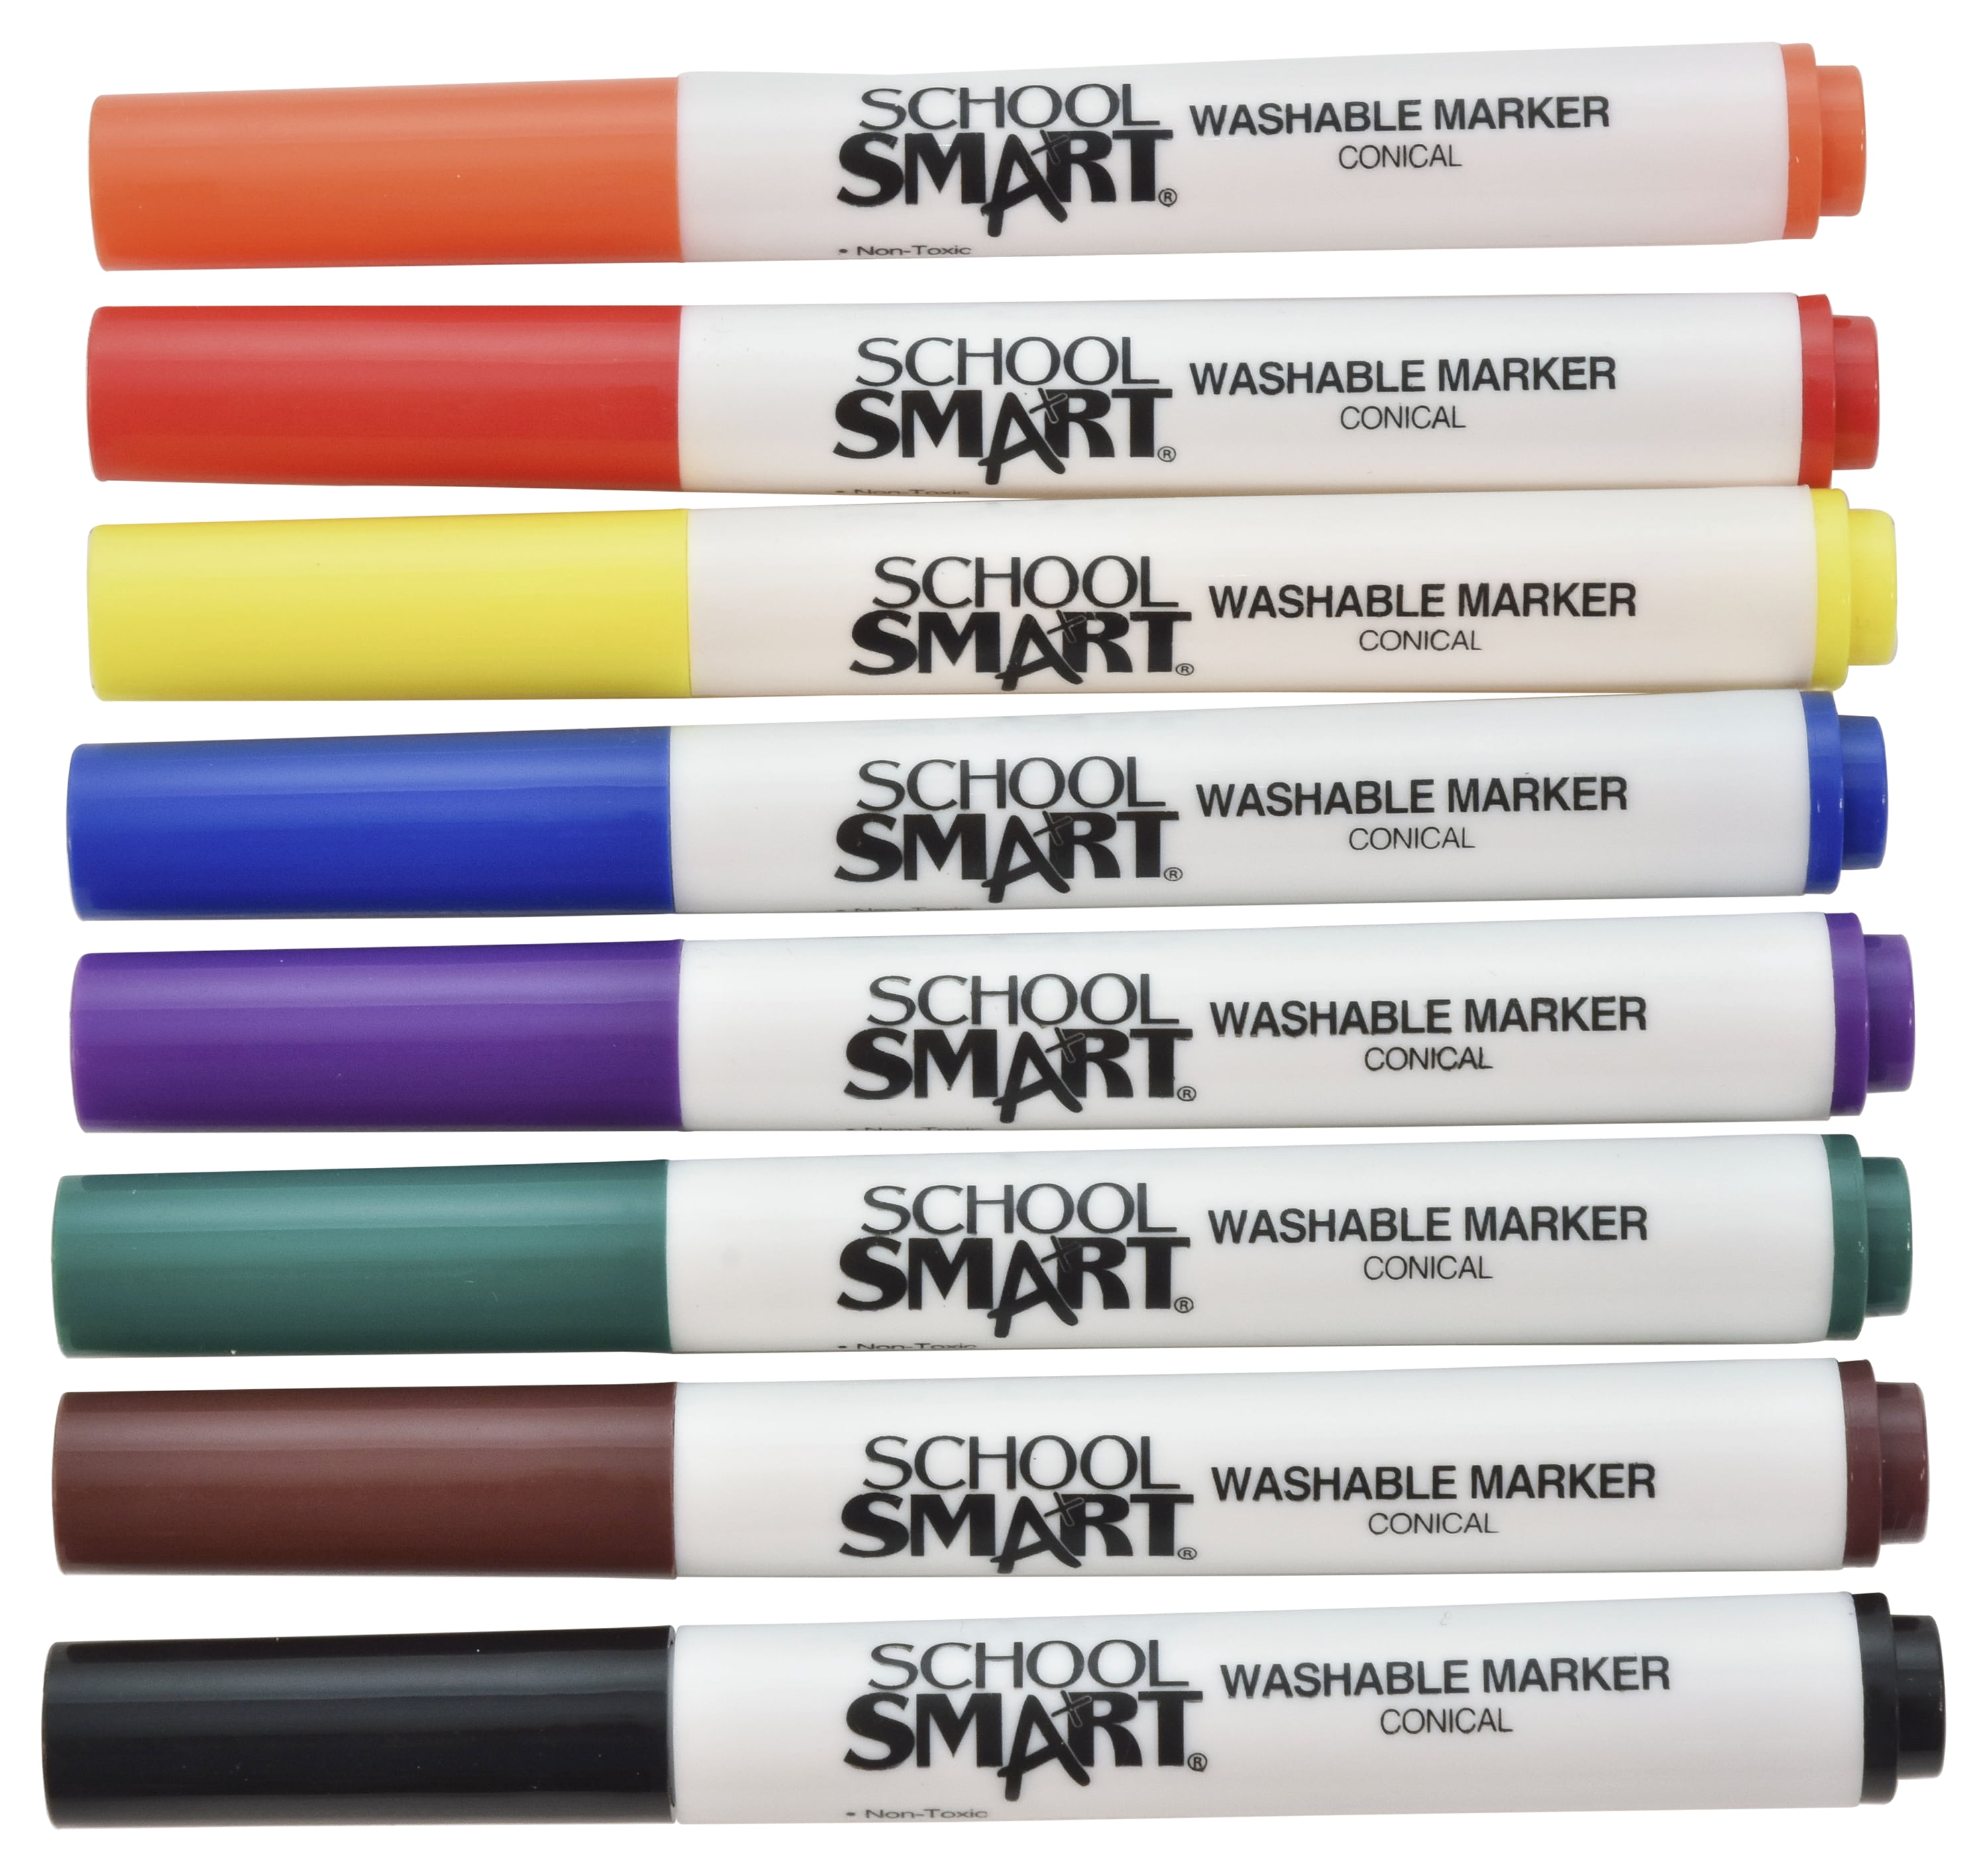 School Smart Washable Markers, Conical Tip, Assorted Colors, Pack of 8